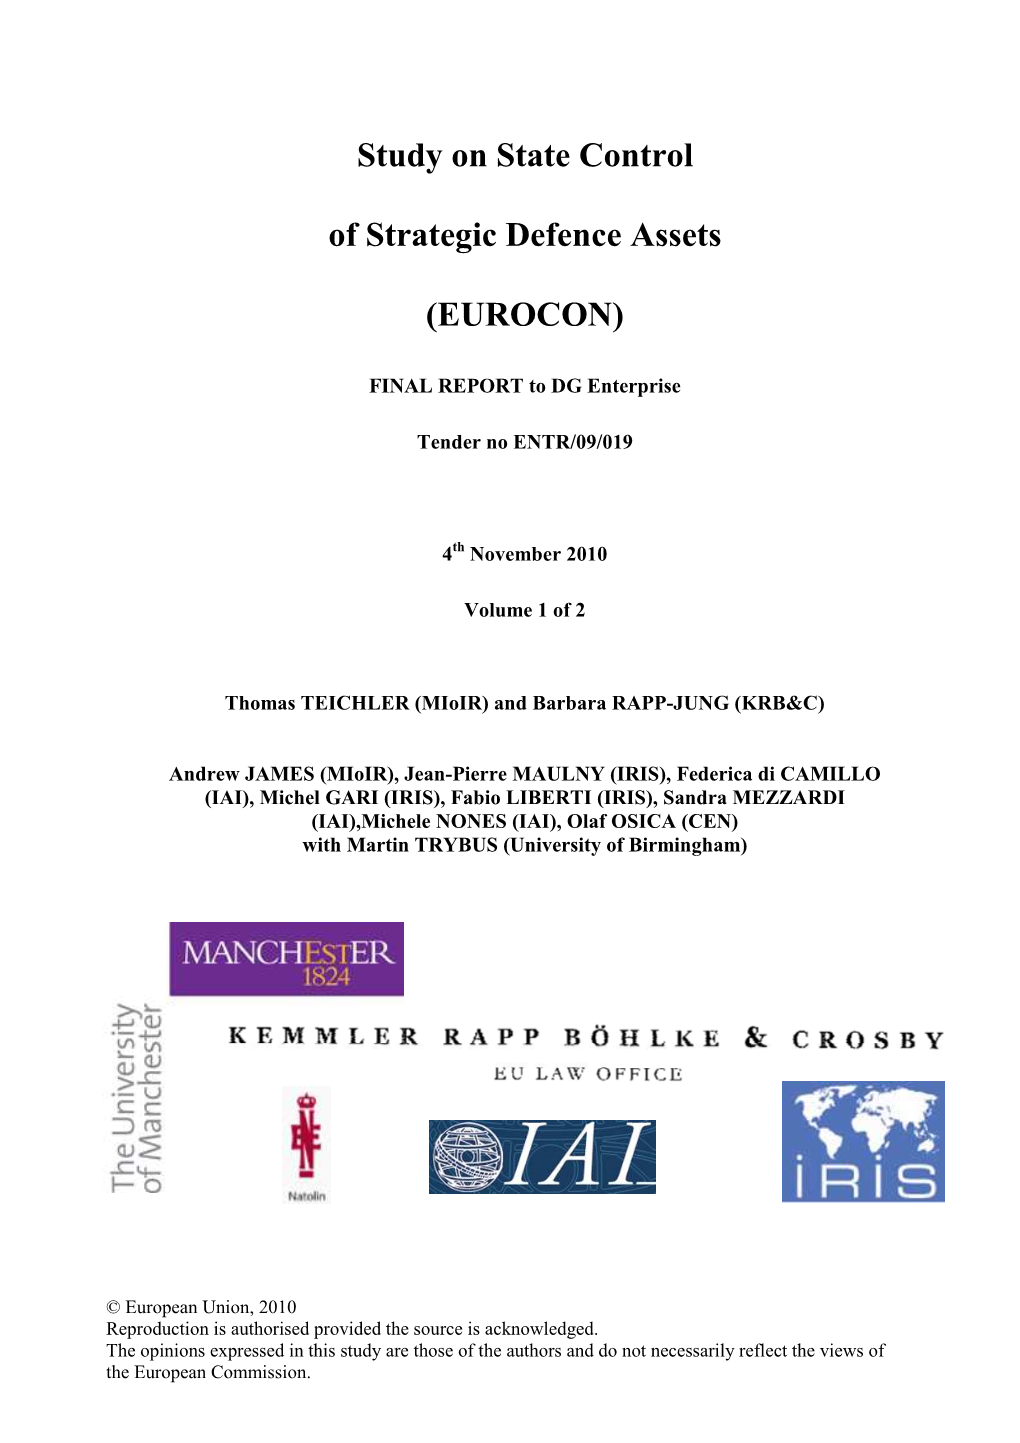 Study on State Control of Strategic Defence Assets – EUROCON